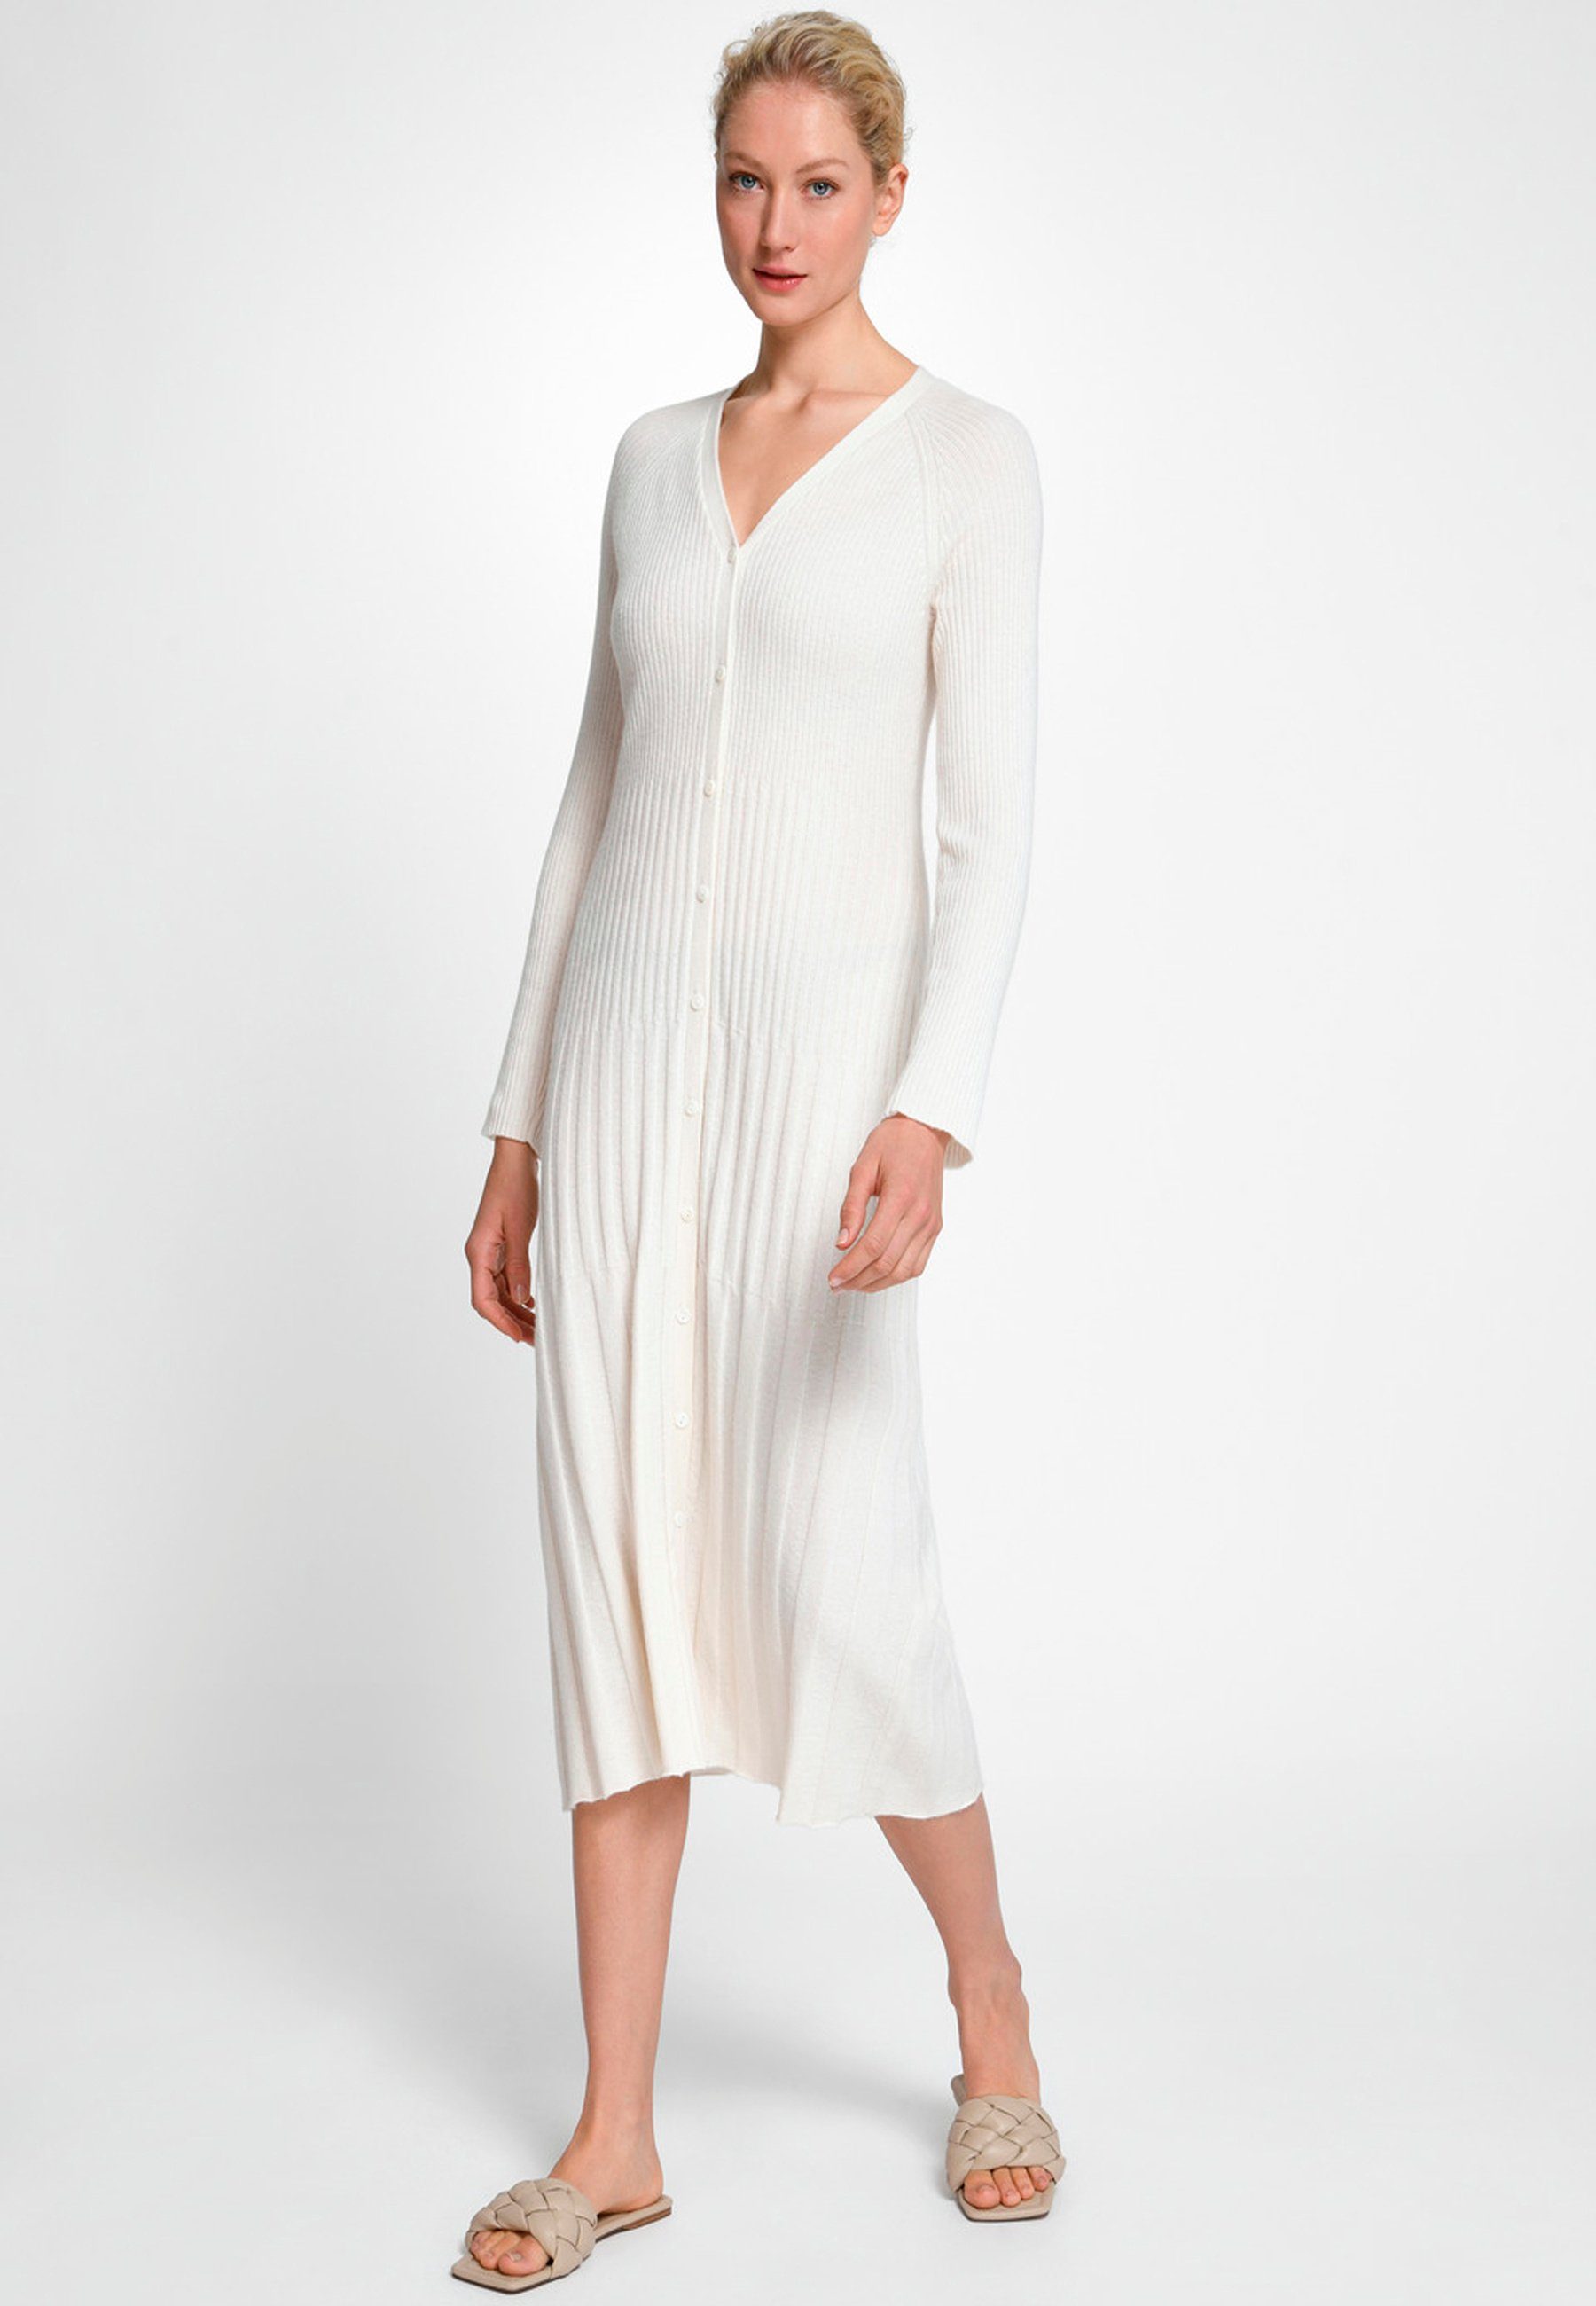 include Strickkleid wollweiss Cashmere